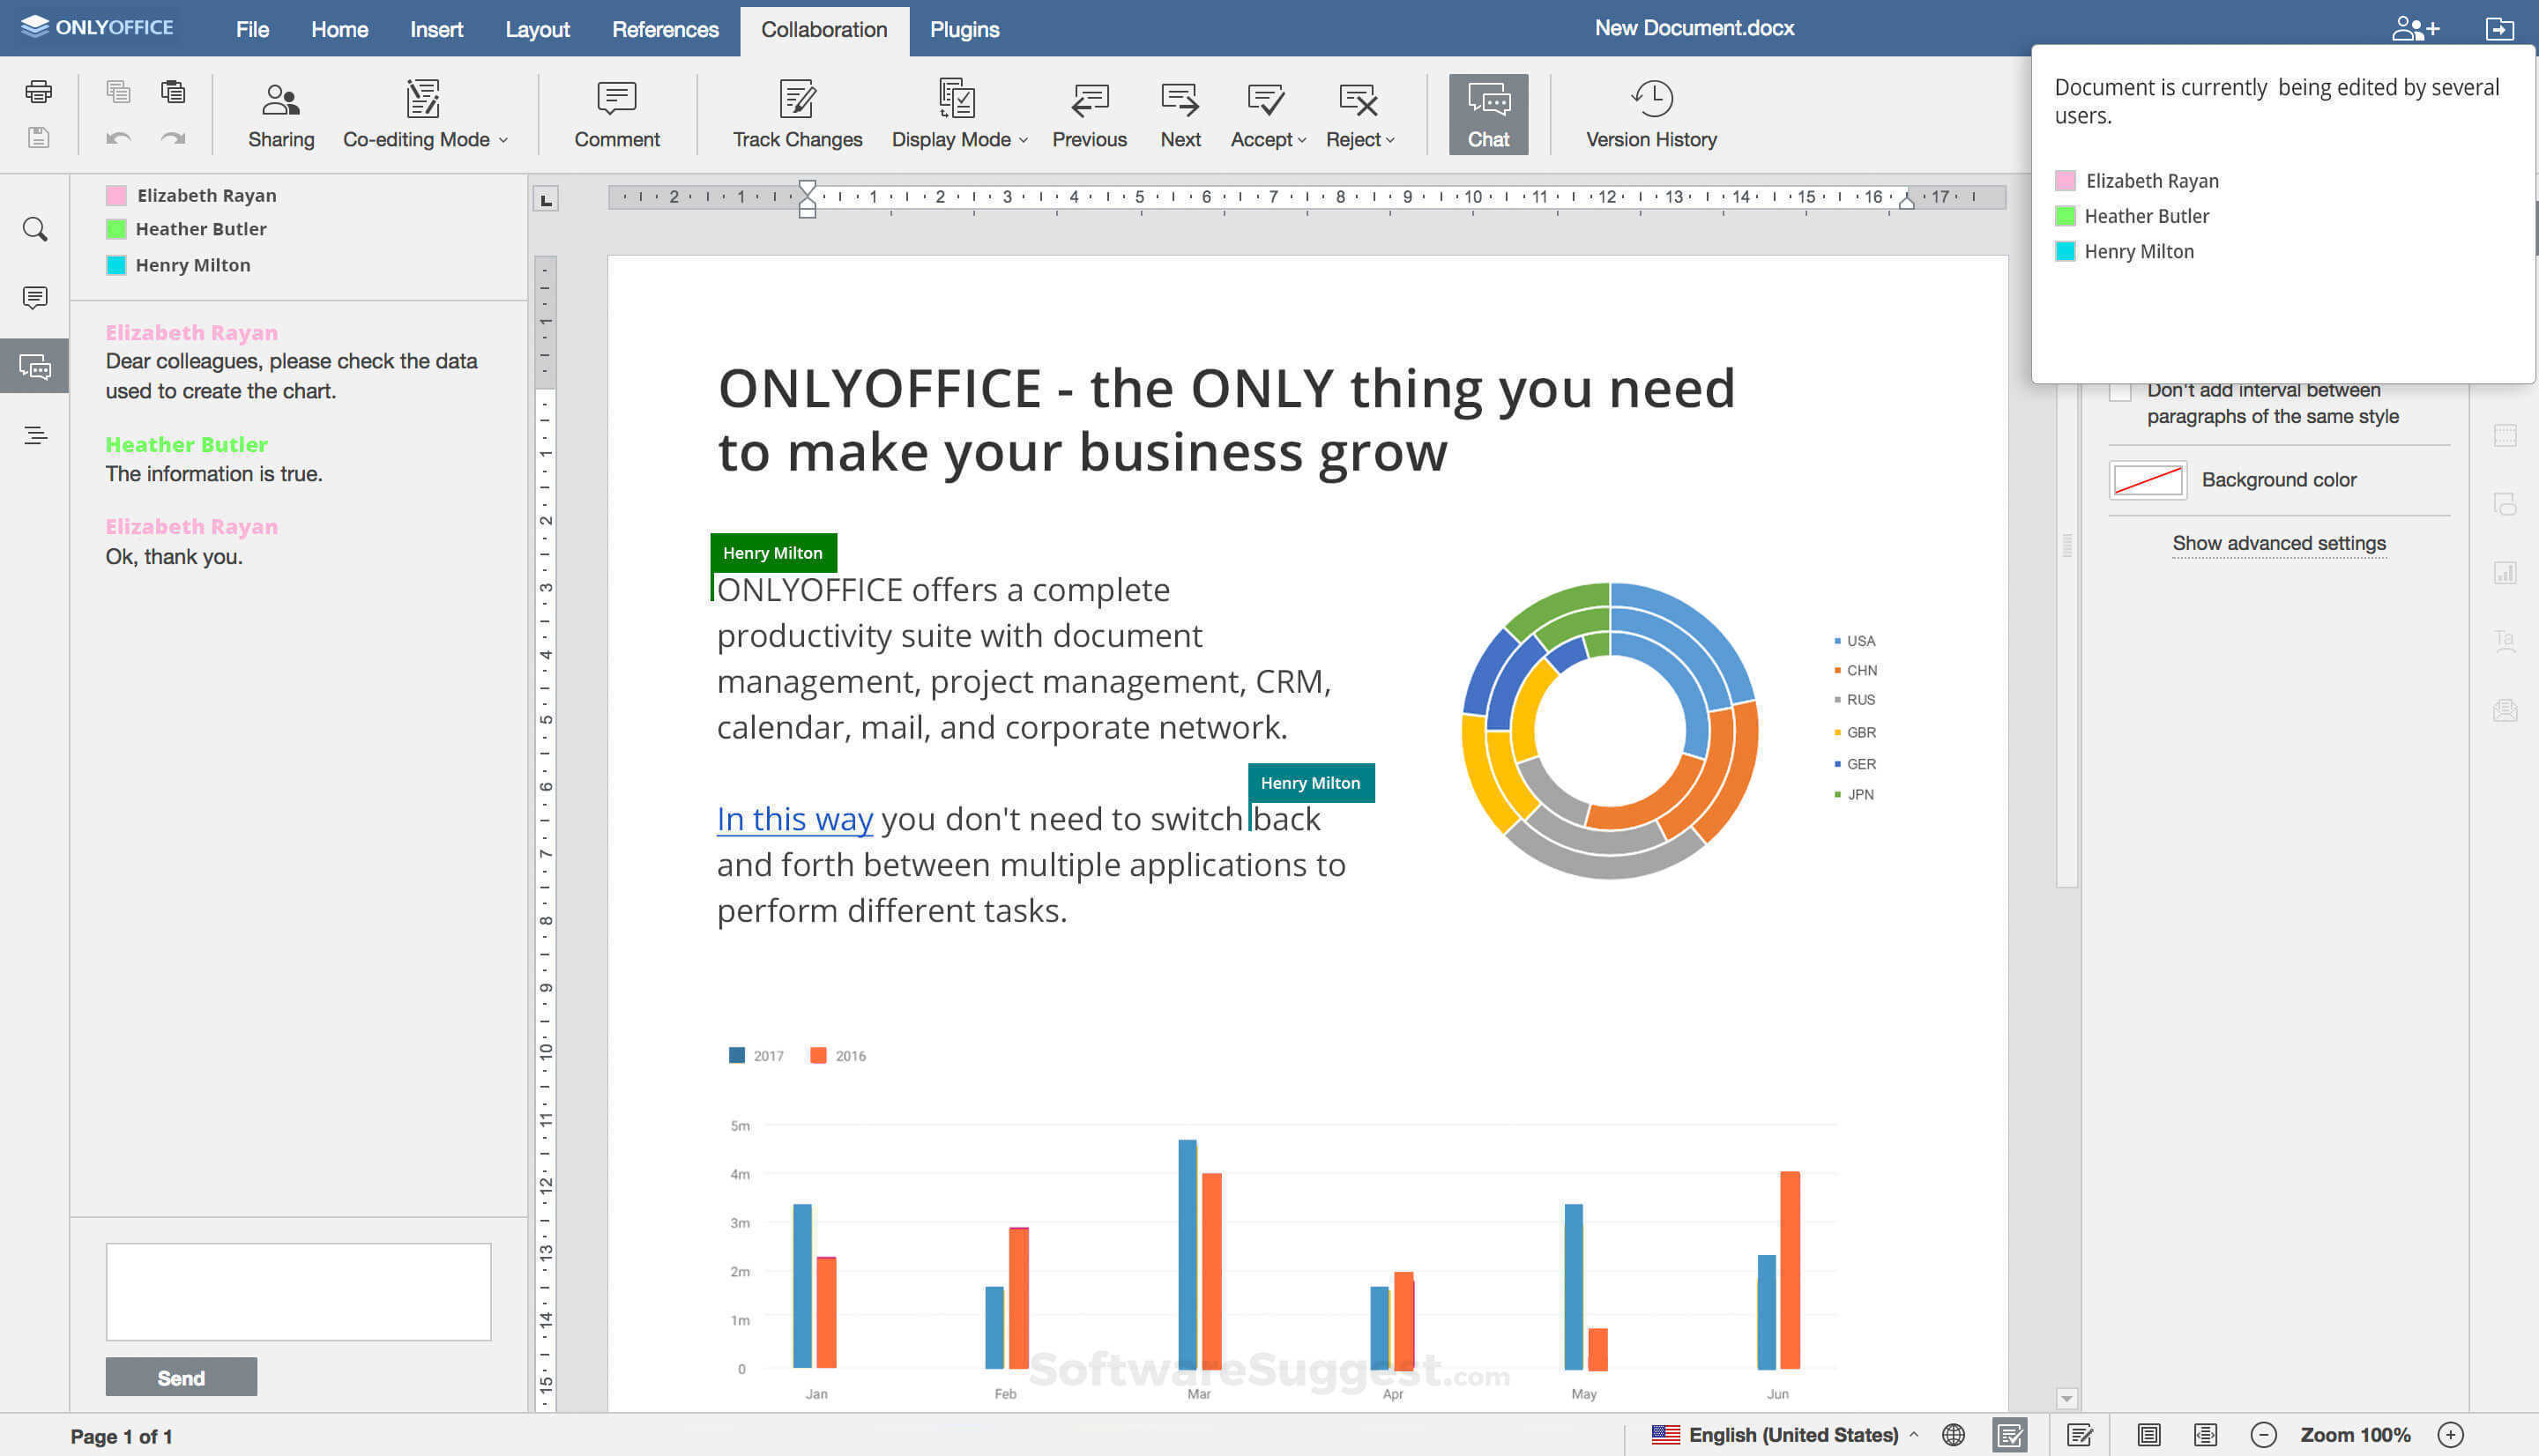 ONLYOFFICE 7.4.1.36 download the last version for ios